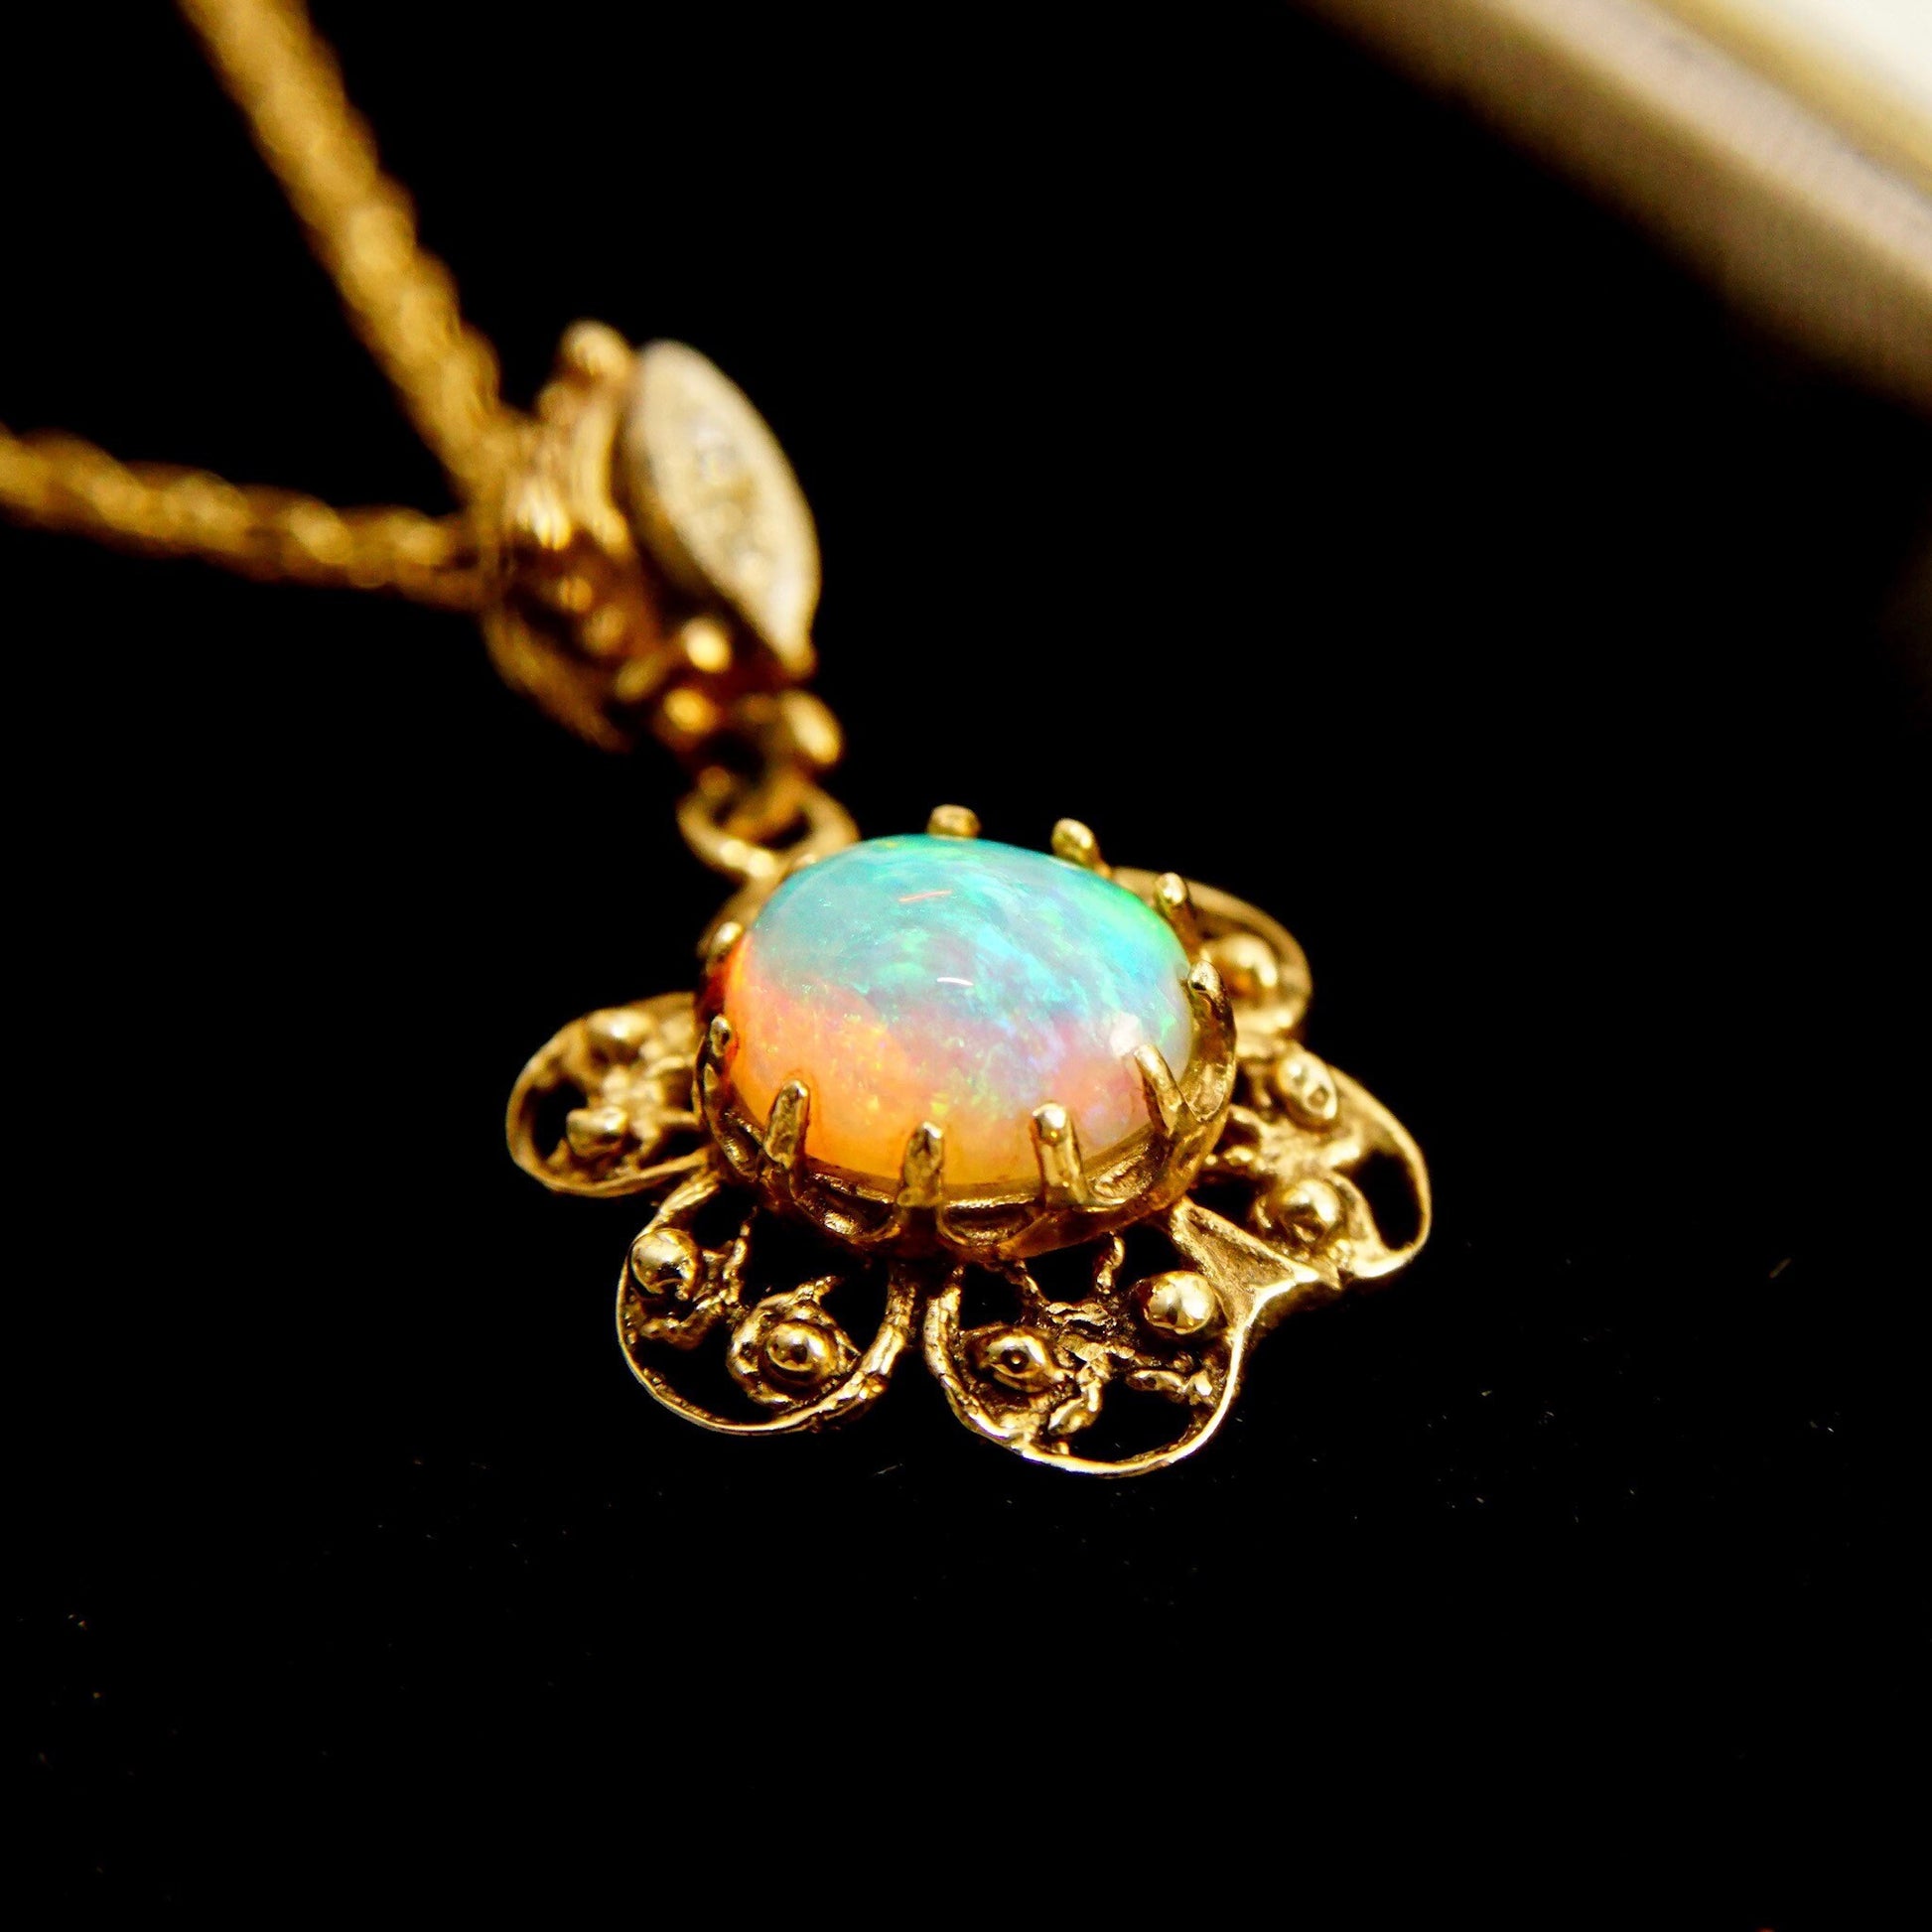 14K gold filigree necklace featuring an opal cabochon pendant in a flower design with two diamond accents, suspended from a delicate 1.5mm rope chain measuring 21 inches in length.